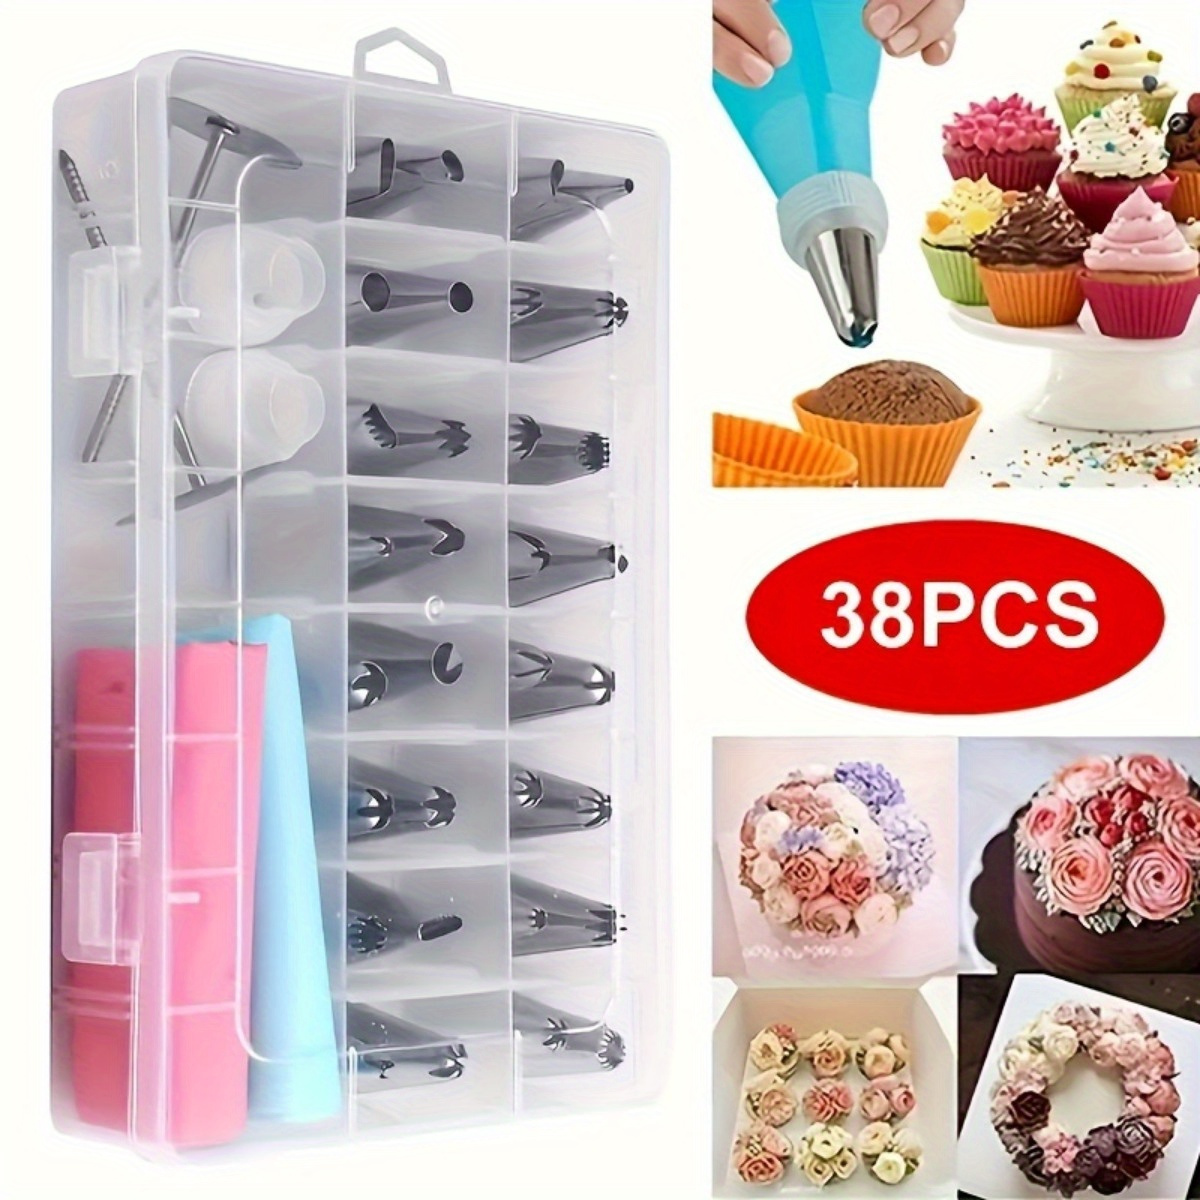 

38pcs Stainless Steel Icing & Piping Tips Set With Storage Box, 32 Nozzles, 2 Converters, 2 Flower Nails, 2 Pastry Bags For Cake Decorating, Cupcake, Baking Tools, Kitchen Accessories